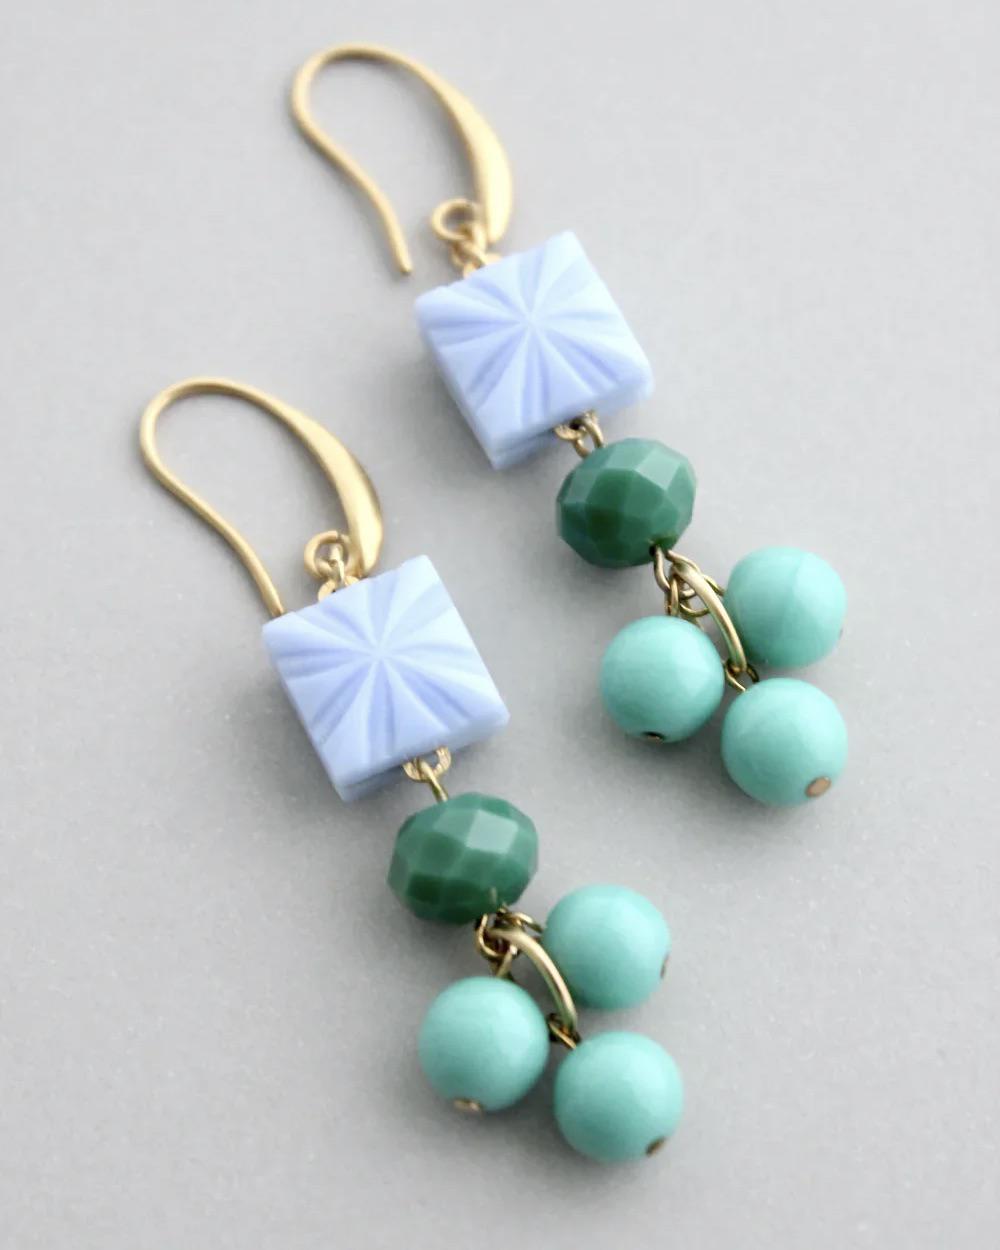 David Aubrey Periwinkle Green and Turquoise Earrings